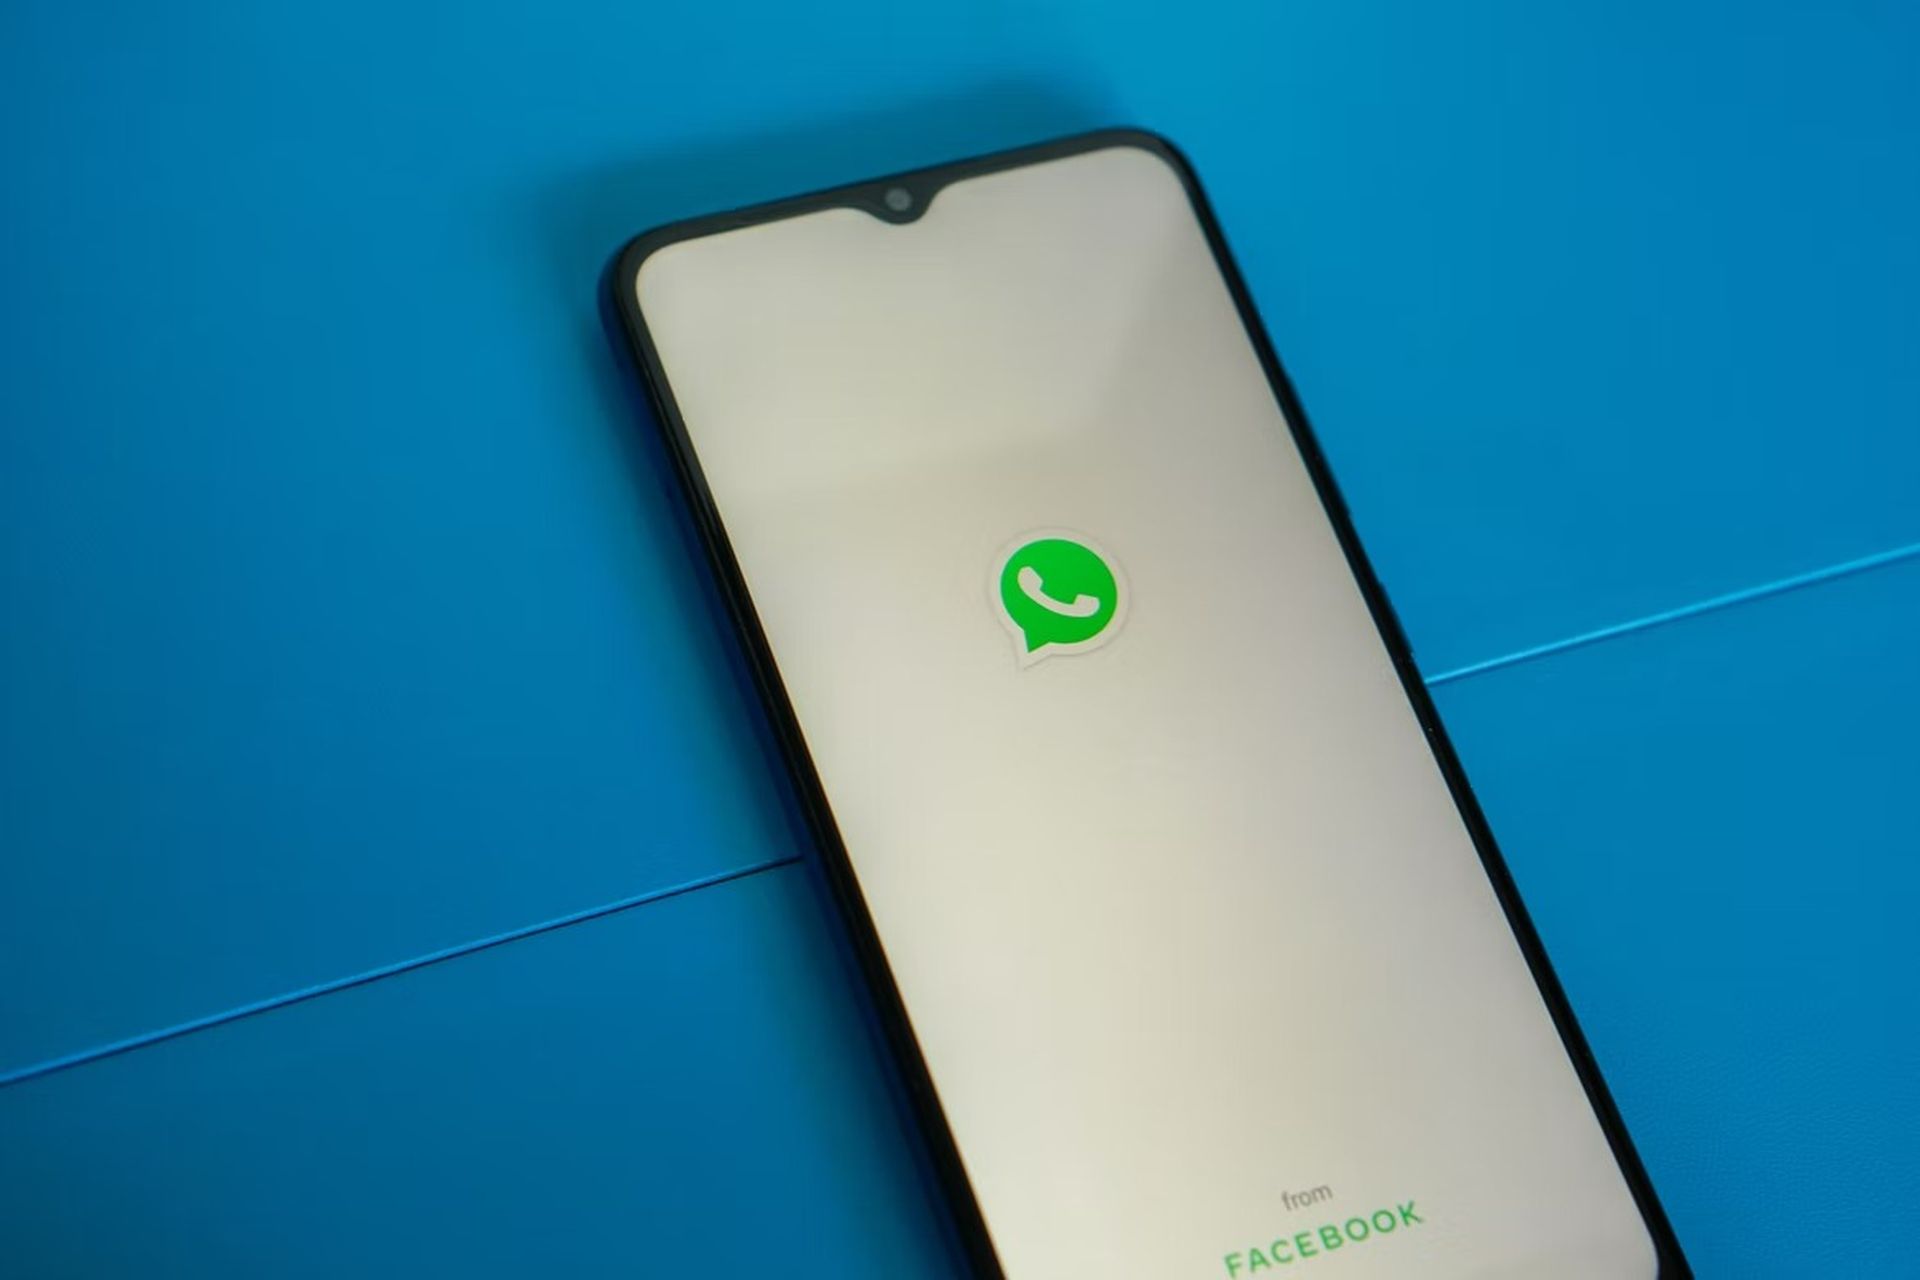 If you don't know how to send WhatsApp message without saving number, we are going to help you out.